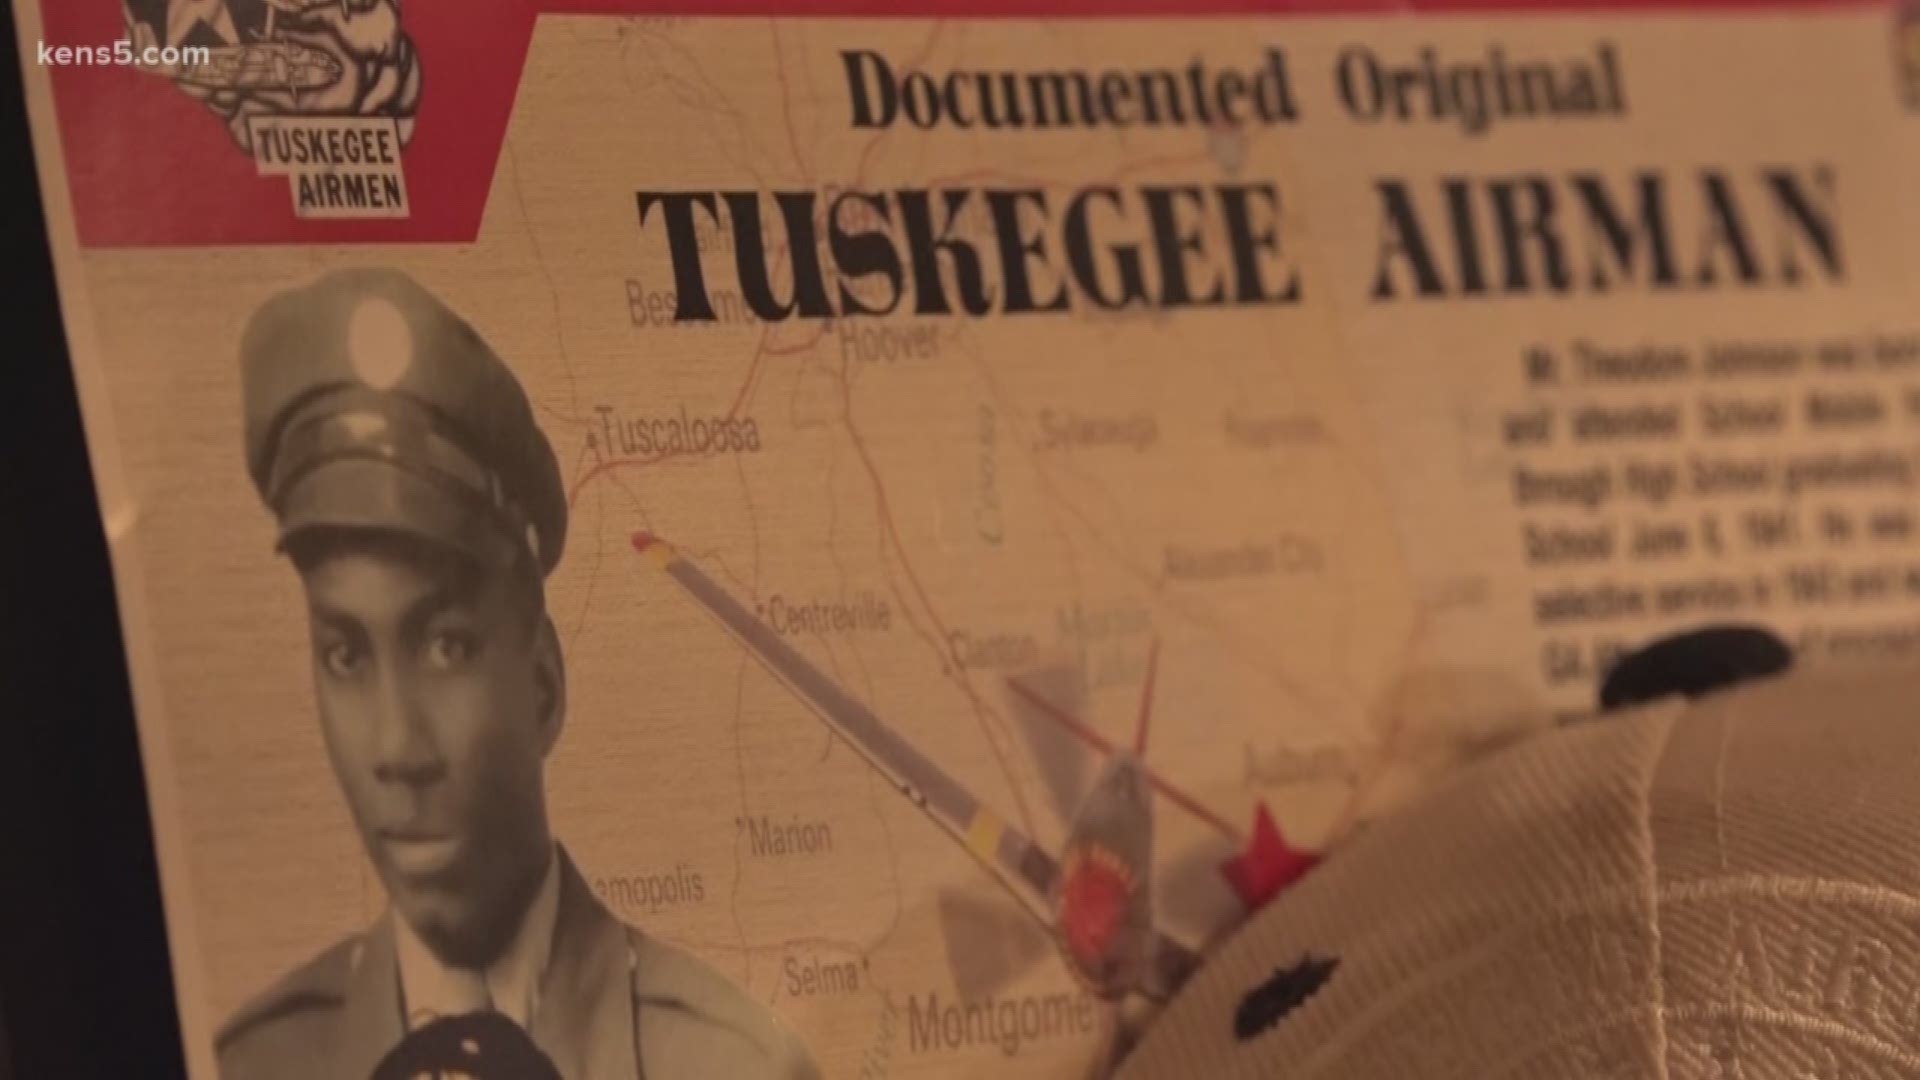 Theodore Johnson didn't talk much about his experience as one of the first black aviators in the U.S. military until he joined the SA chapter of Tuskegee Airmen.